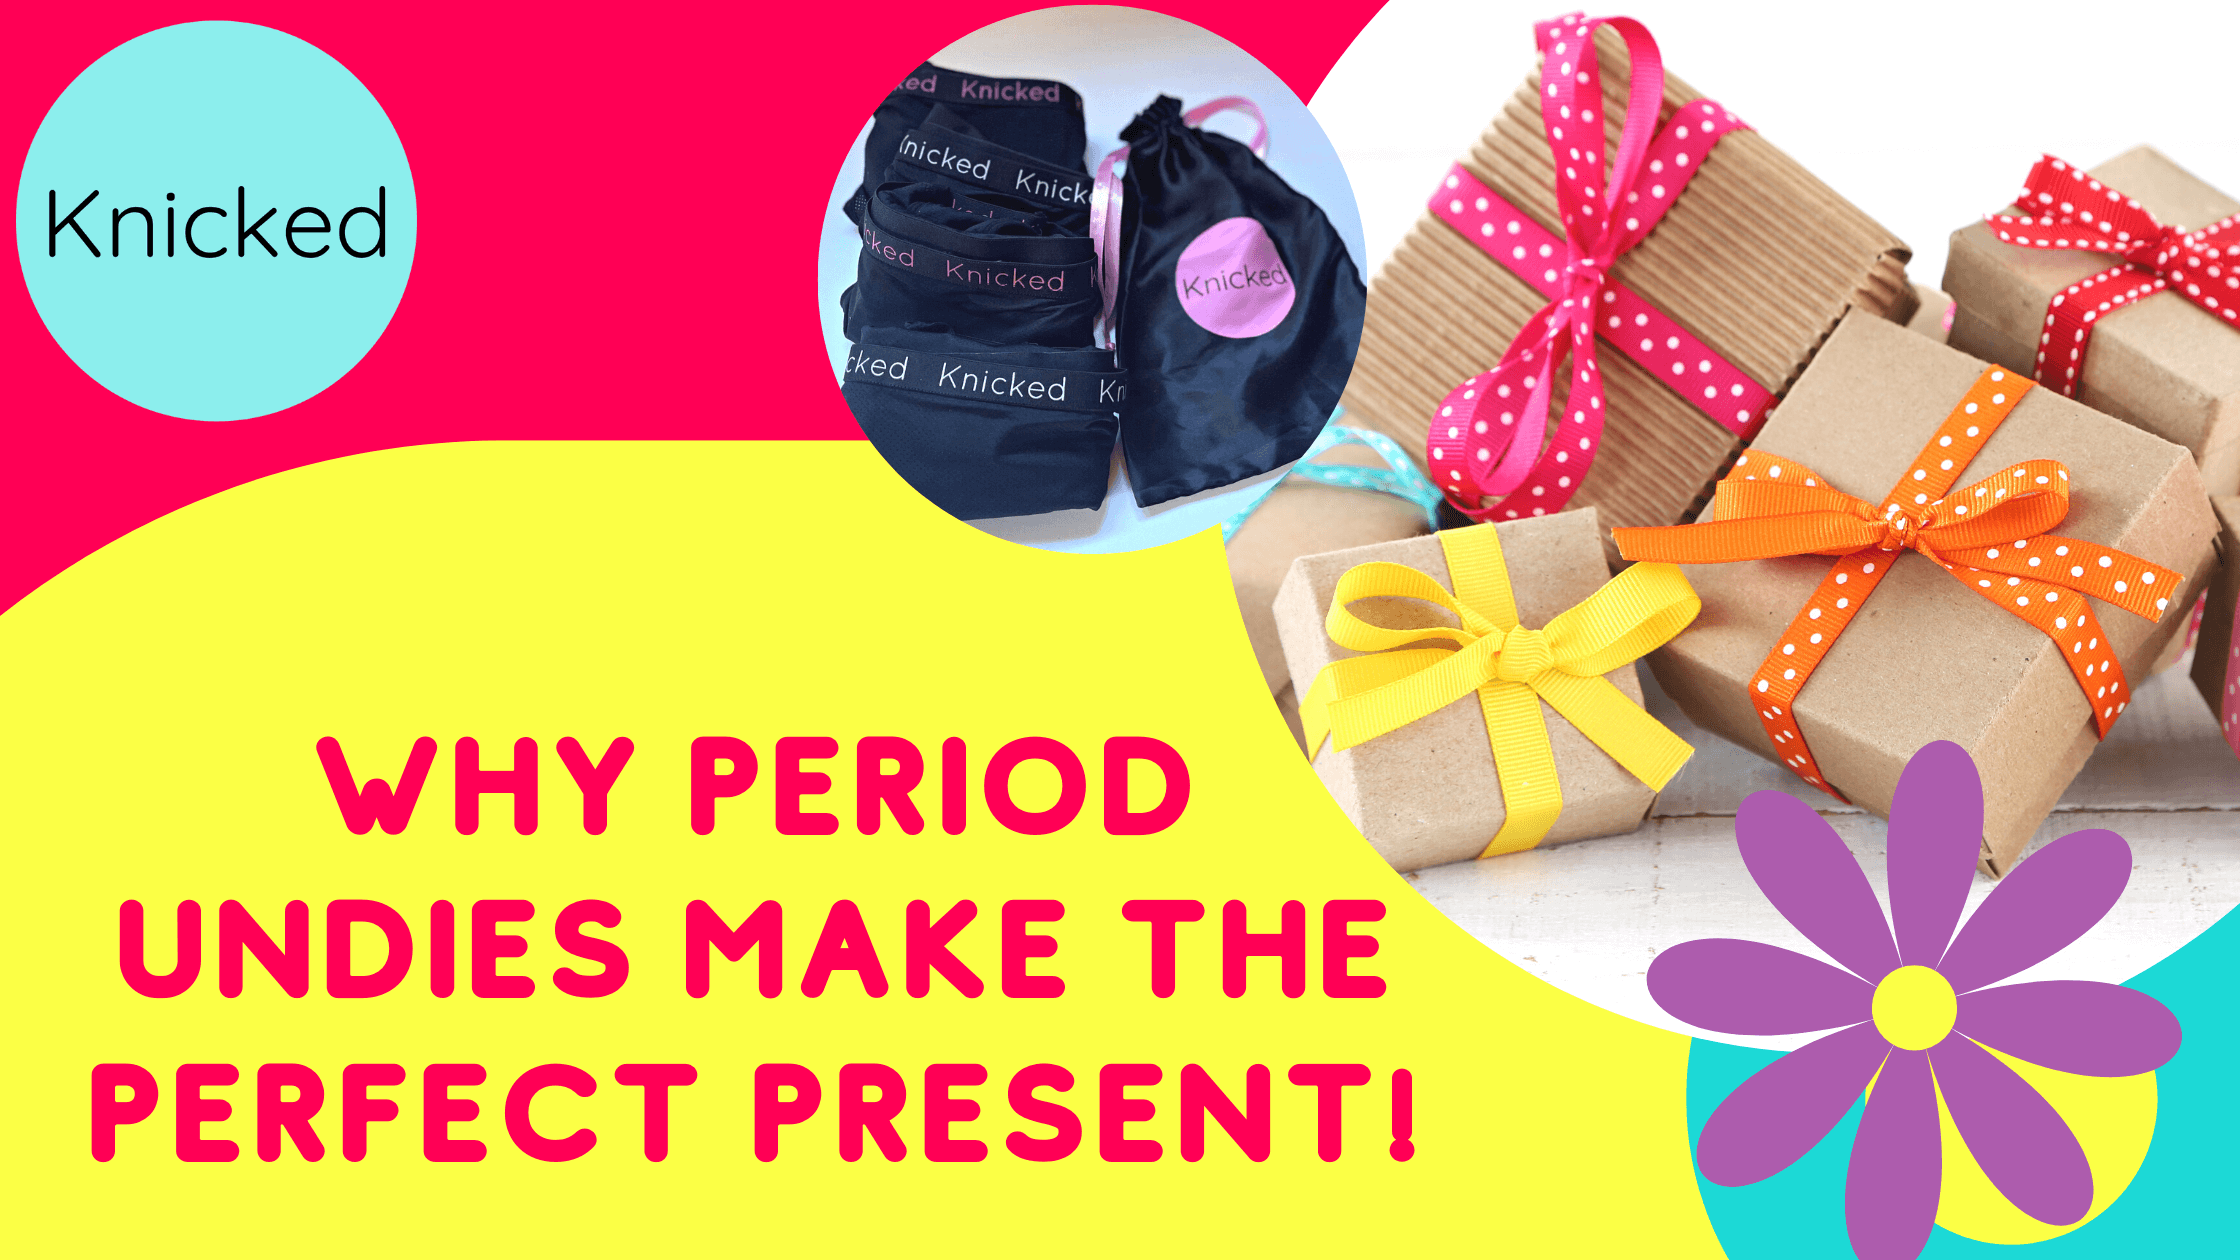 knicked period undies make the best gift for tweens and teens for any occasion